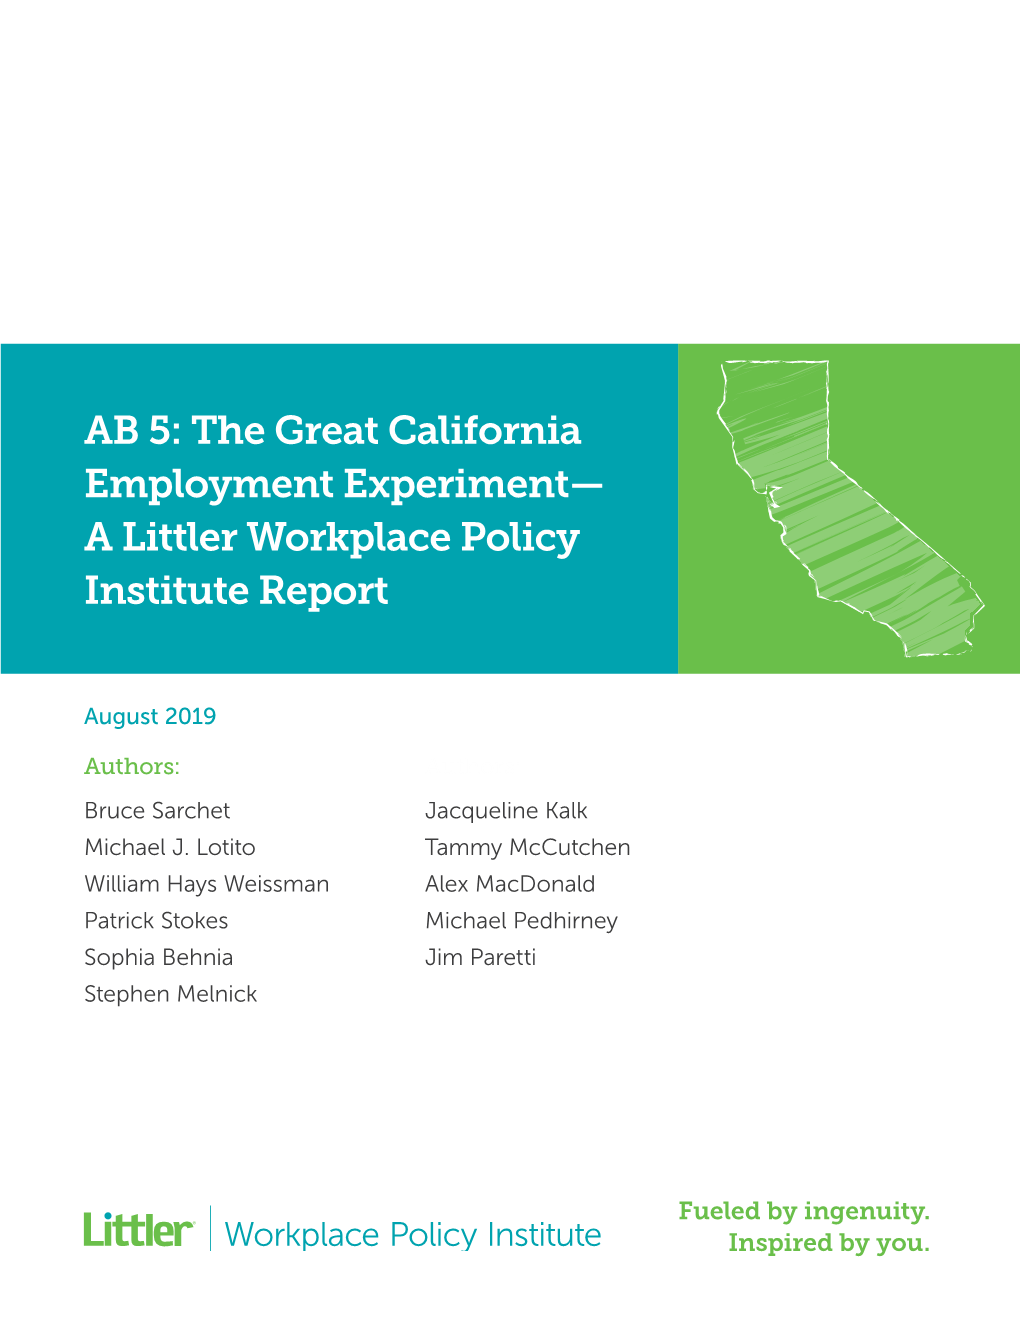 The Great California Employment Experiment— a Littler Workplace Policy Institute Report